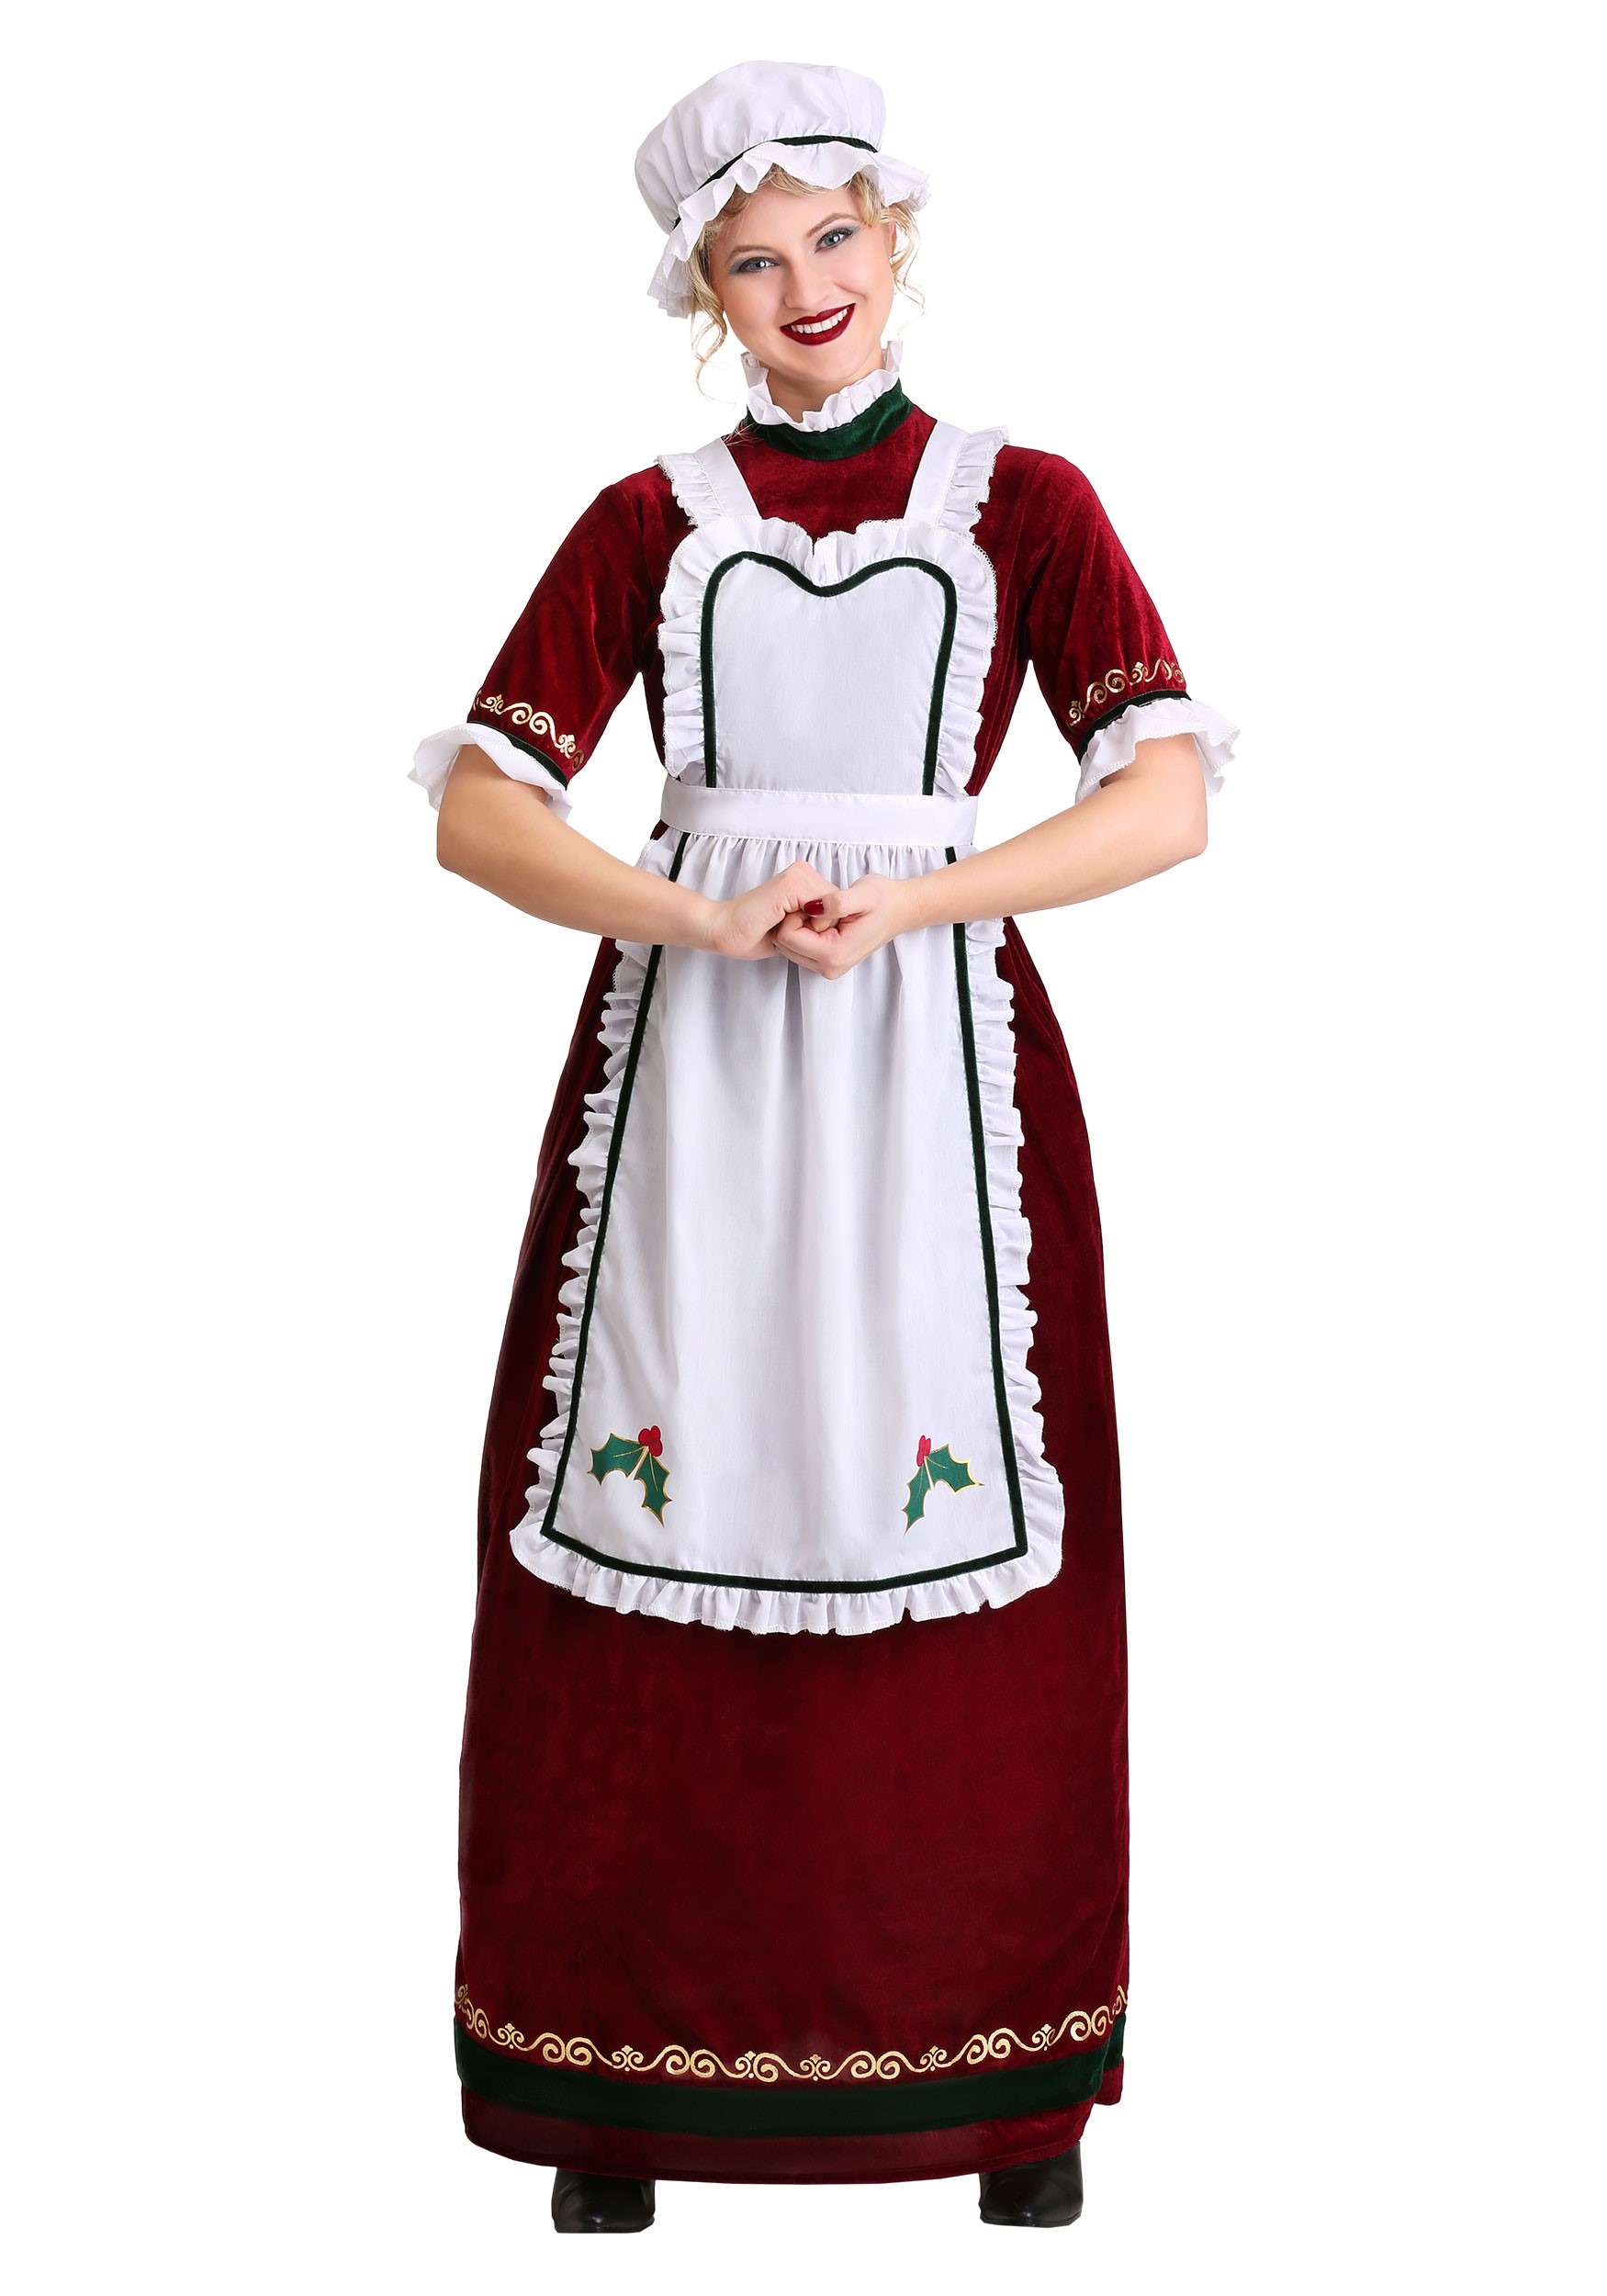 Photos - Fancy Dress CLAUS FUN Costumes Mrs.  Women's Holiday Costume Red/White FUN7098AD 